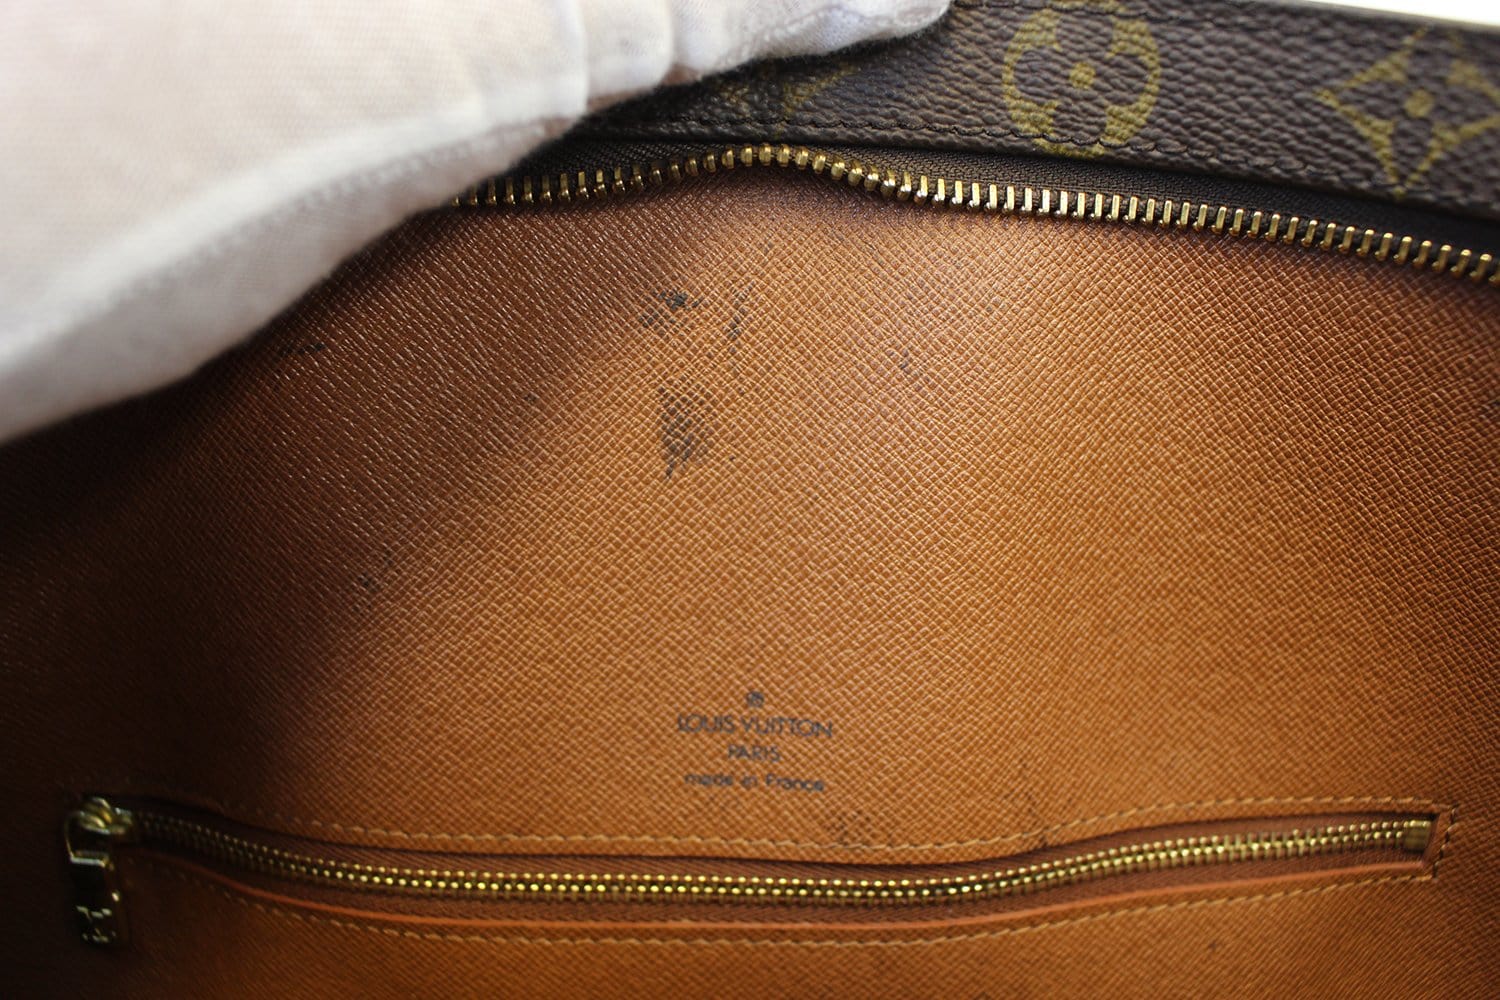 Louis Vuitton 1997 Pre-owned Monogram Babylone Tote - Brown